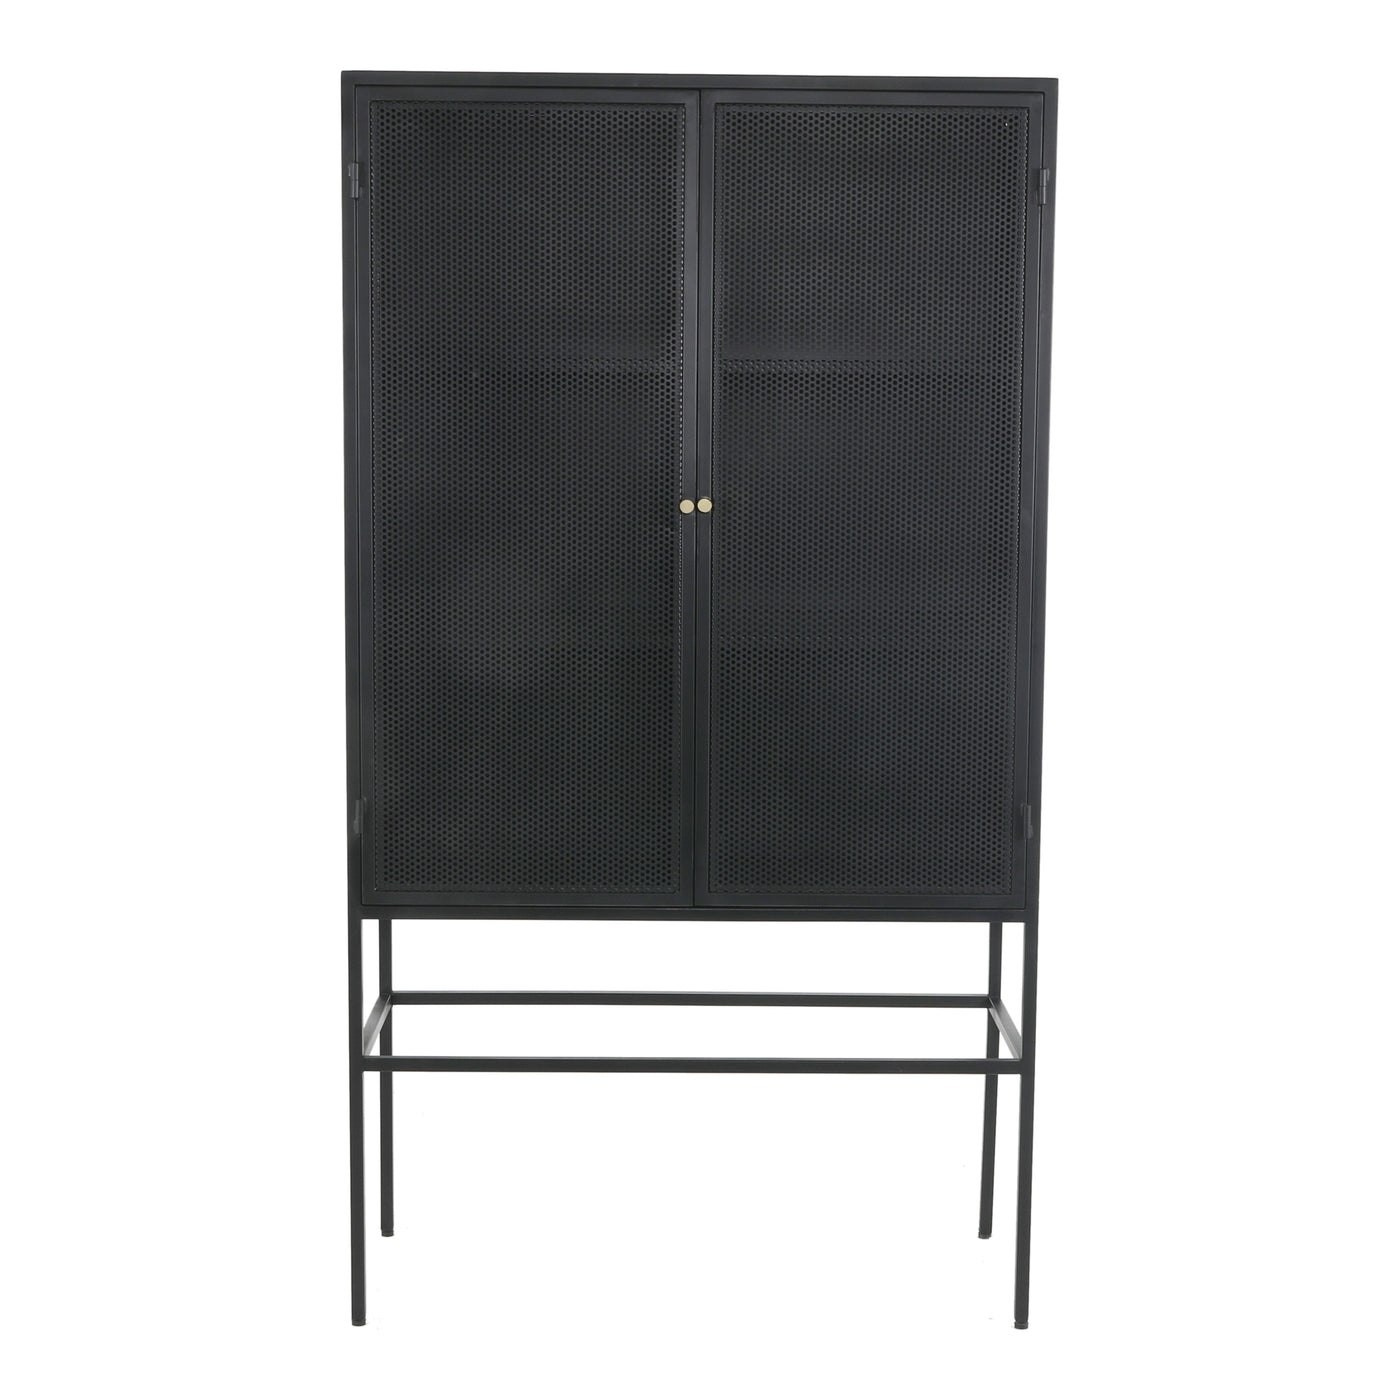 An industrial beauty. The Isandros Cabinet flashes an all-mechanical look with its pure iron construction and dark finish....